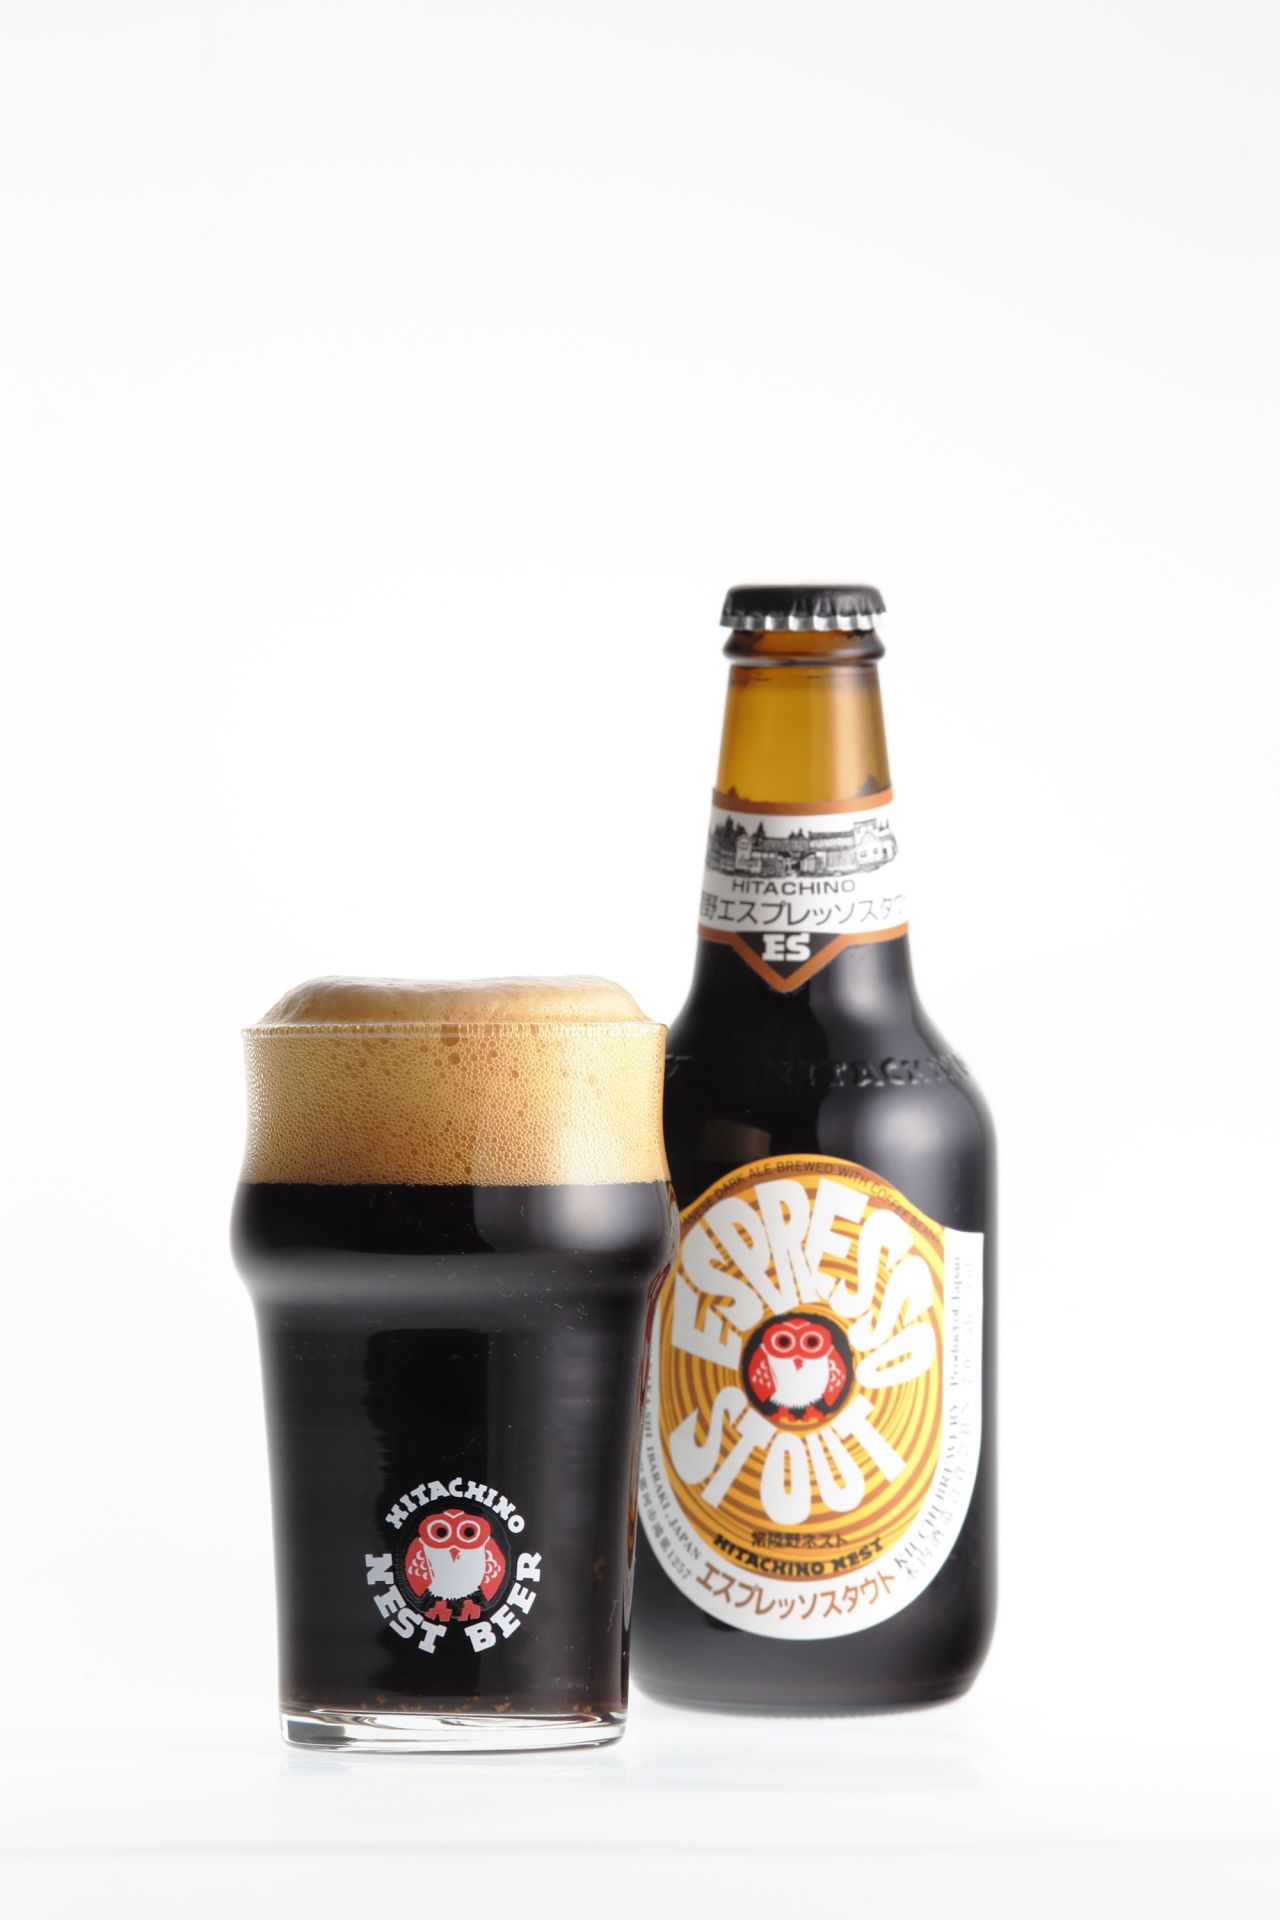 Winner of the 2016 Hong Kong Beer Championship's Best Specialty category, the rich, boozy Hitachino Nest Espresso Stout is Kiuchi Brewery's take on the classic Russian imperial stout. 